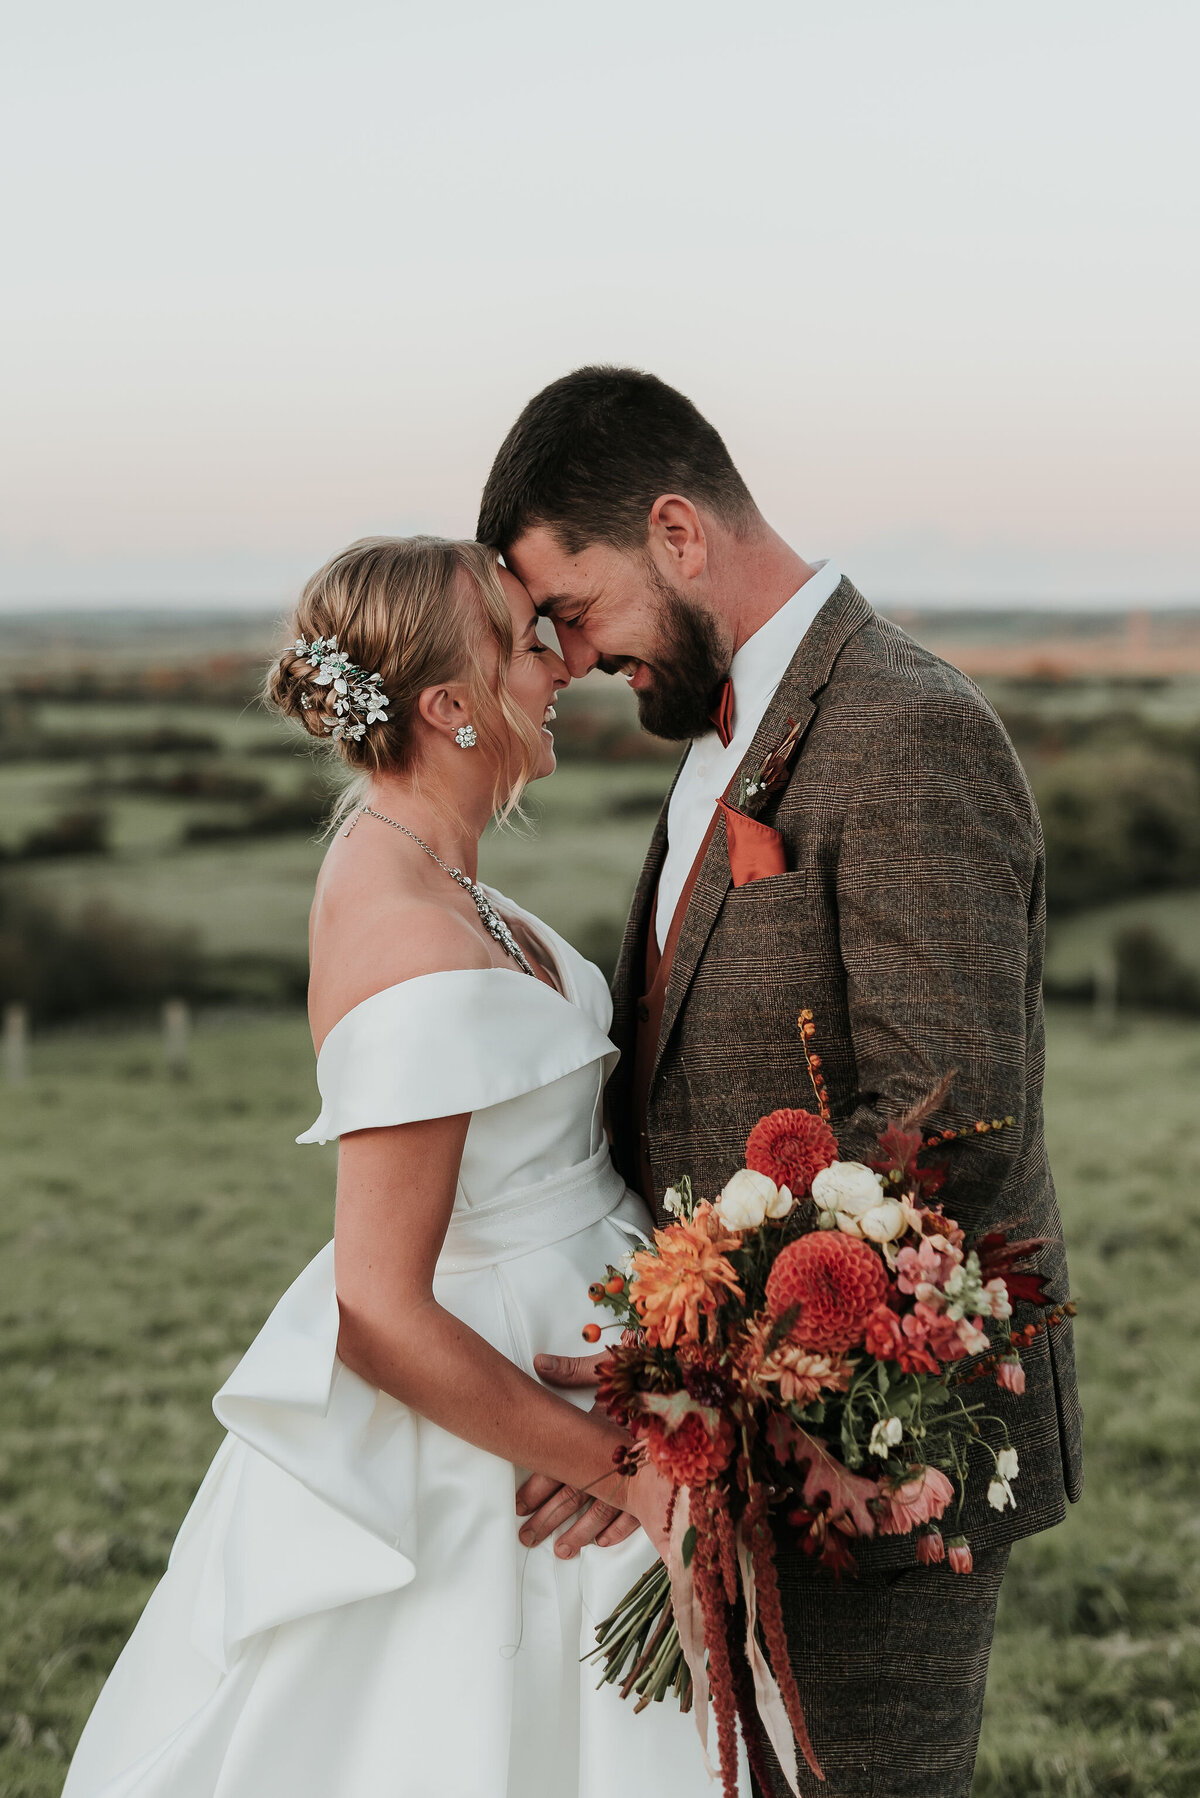 Bride & Groom embrace gently forehand to forehand holding a beautiful Autumn floral bouquet at their rustic fall wedding at Montague Farm, Sussex